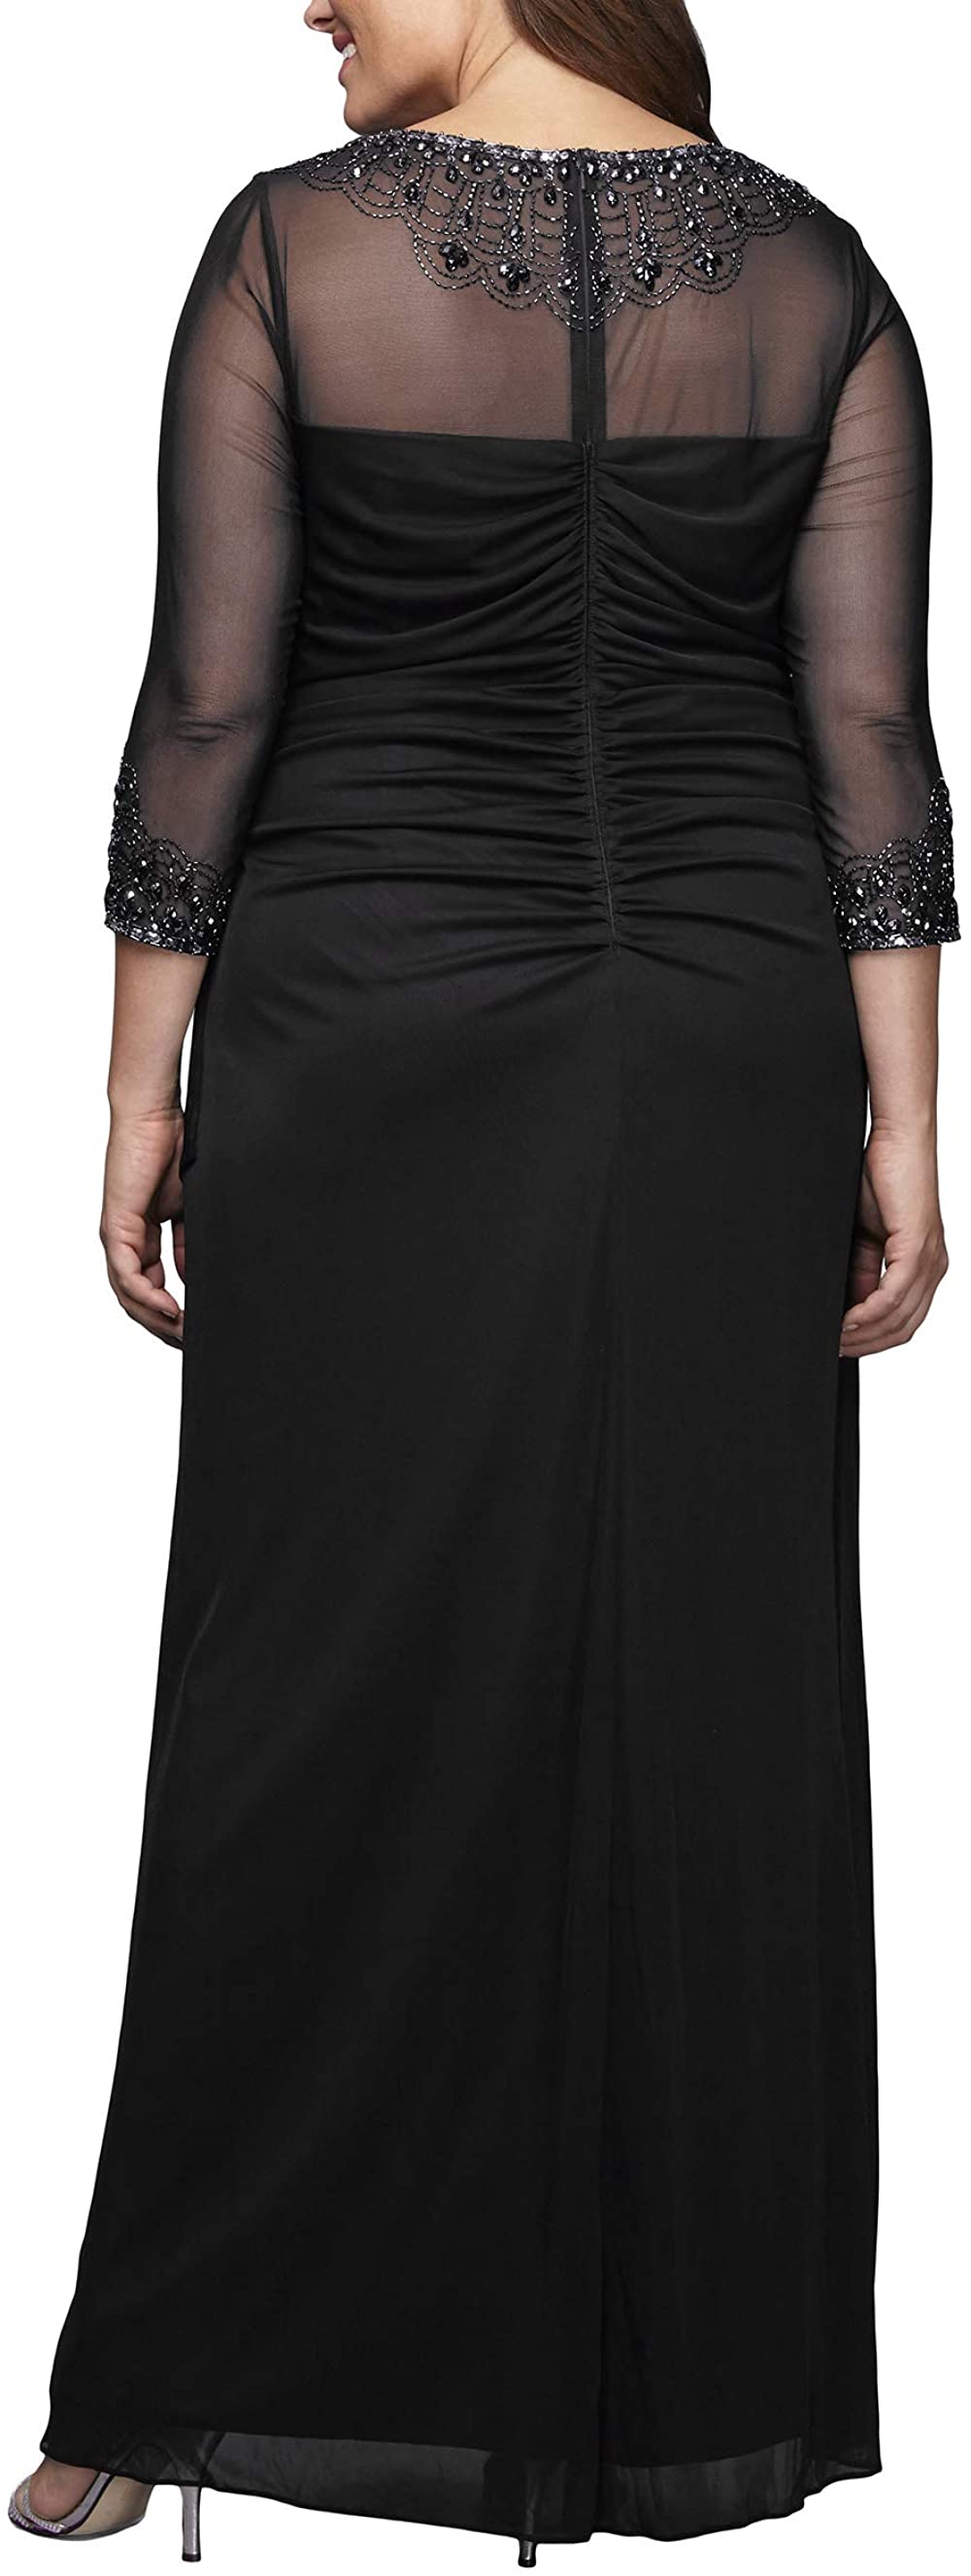 Alex Evenings Womens Plus Size Embellished Sweetheart Gown